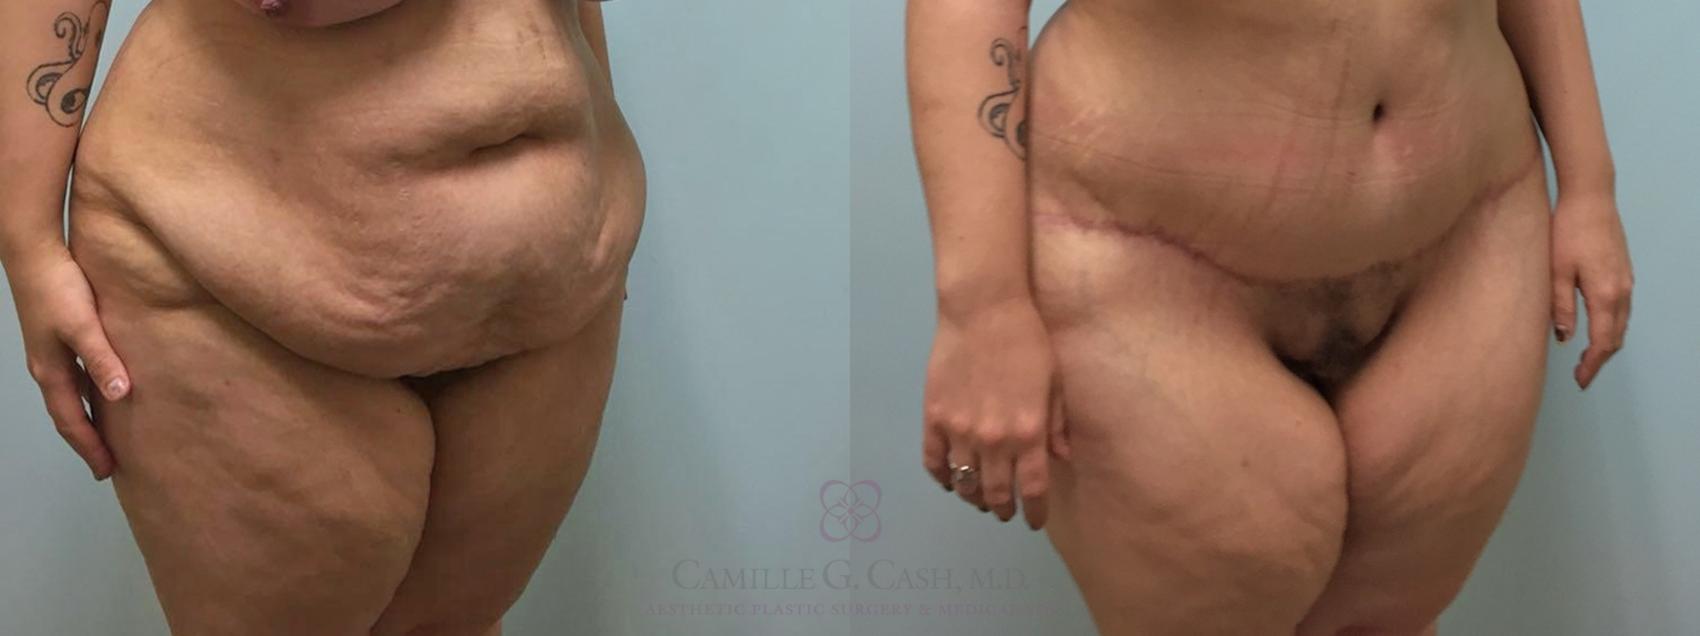 Before & After Tummy Tuck Case 464 Left Oblique View in Houston, TX